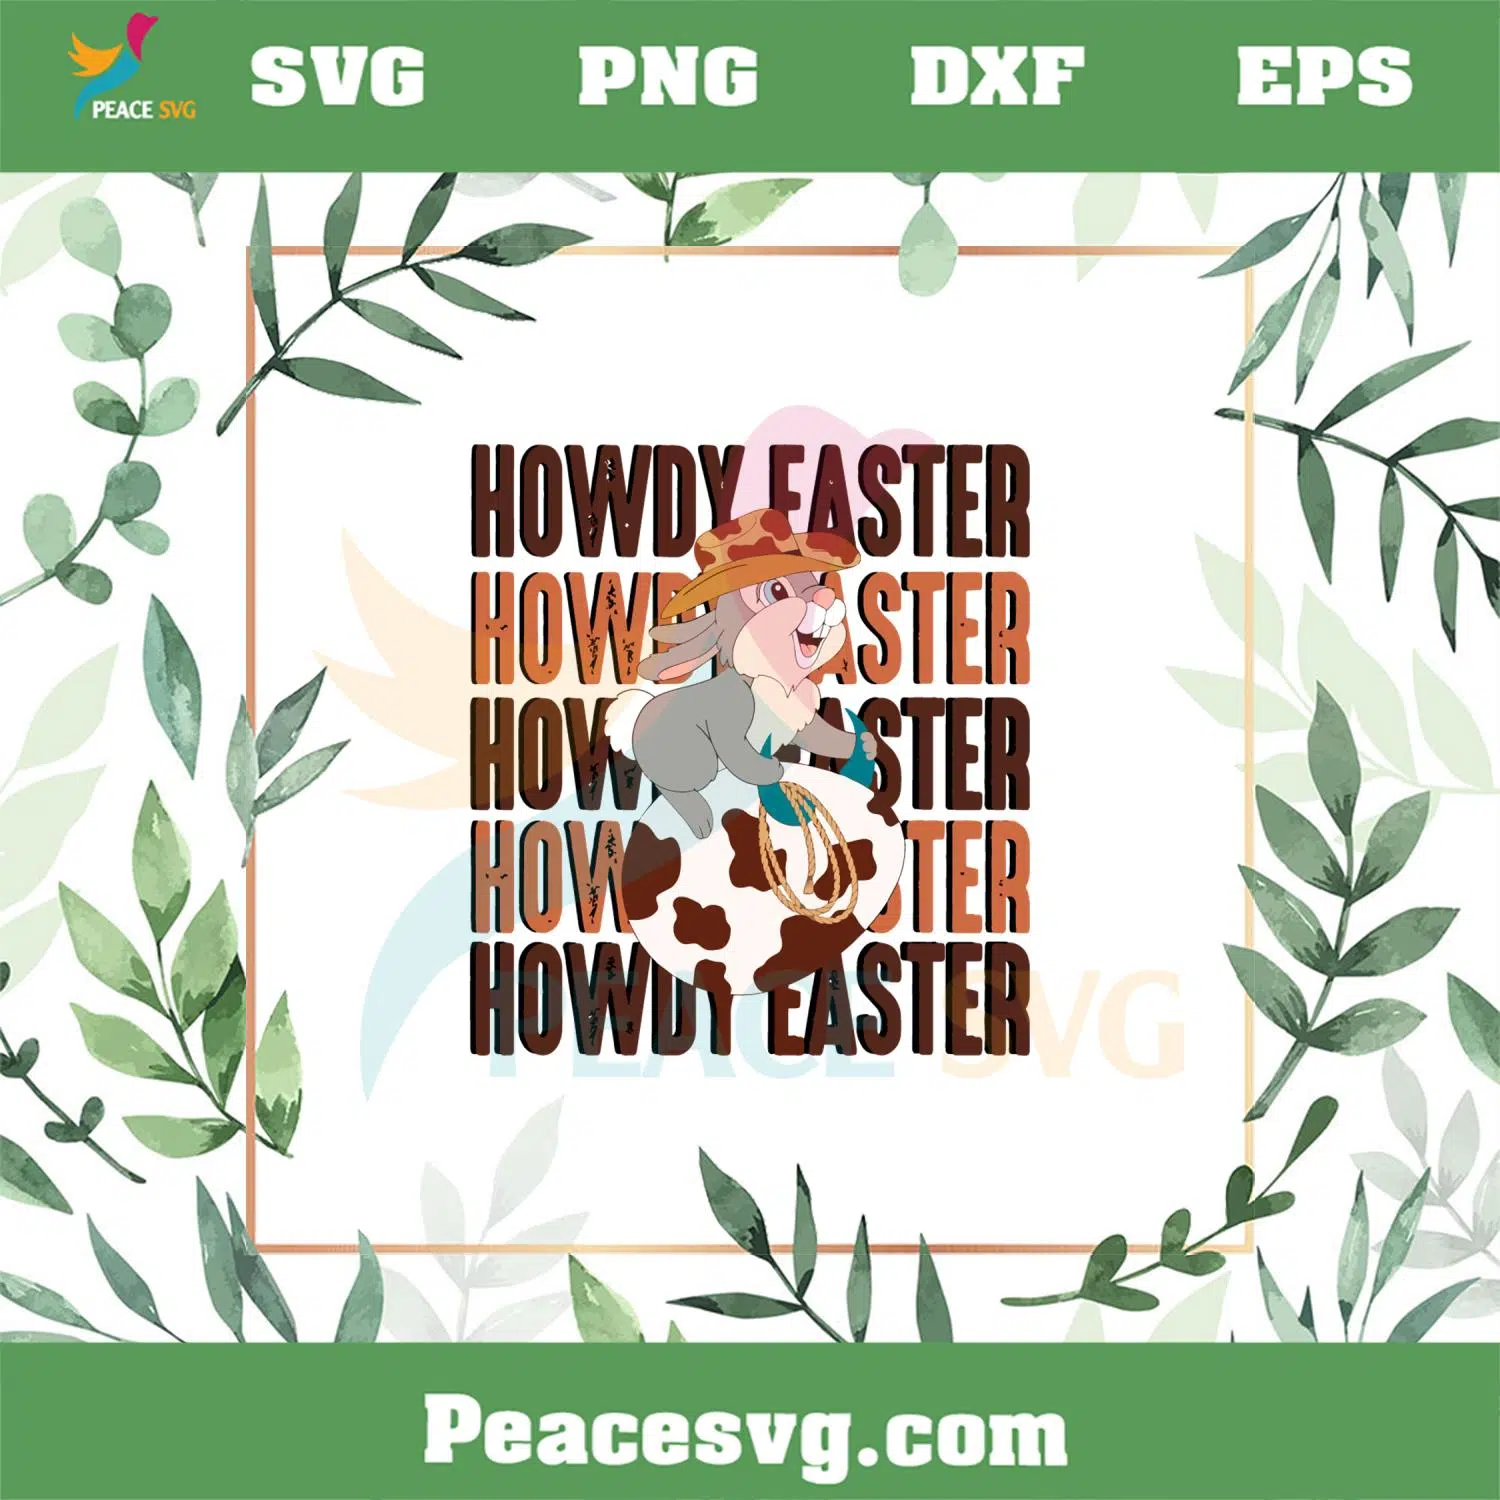 Howdy Easter Cowboy Rabbit Funny Easter Day SVG Cutting Files